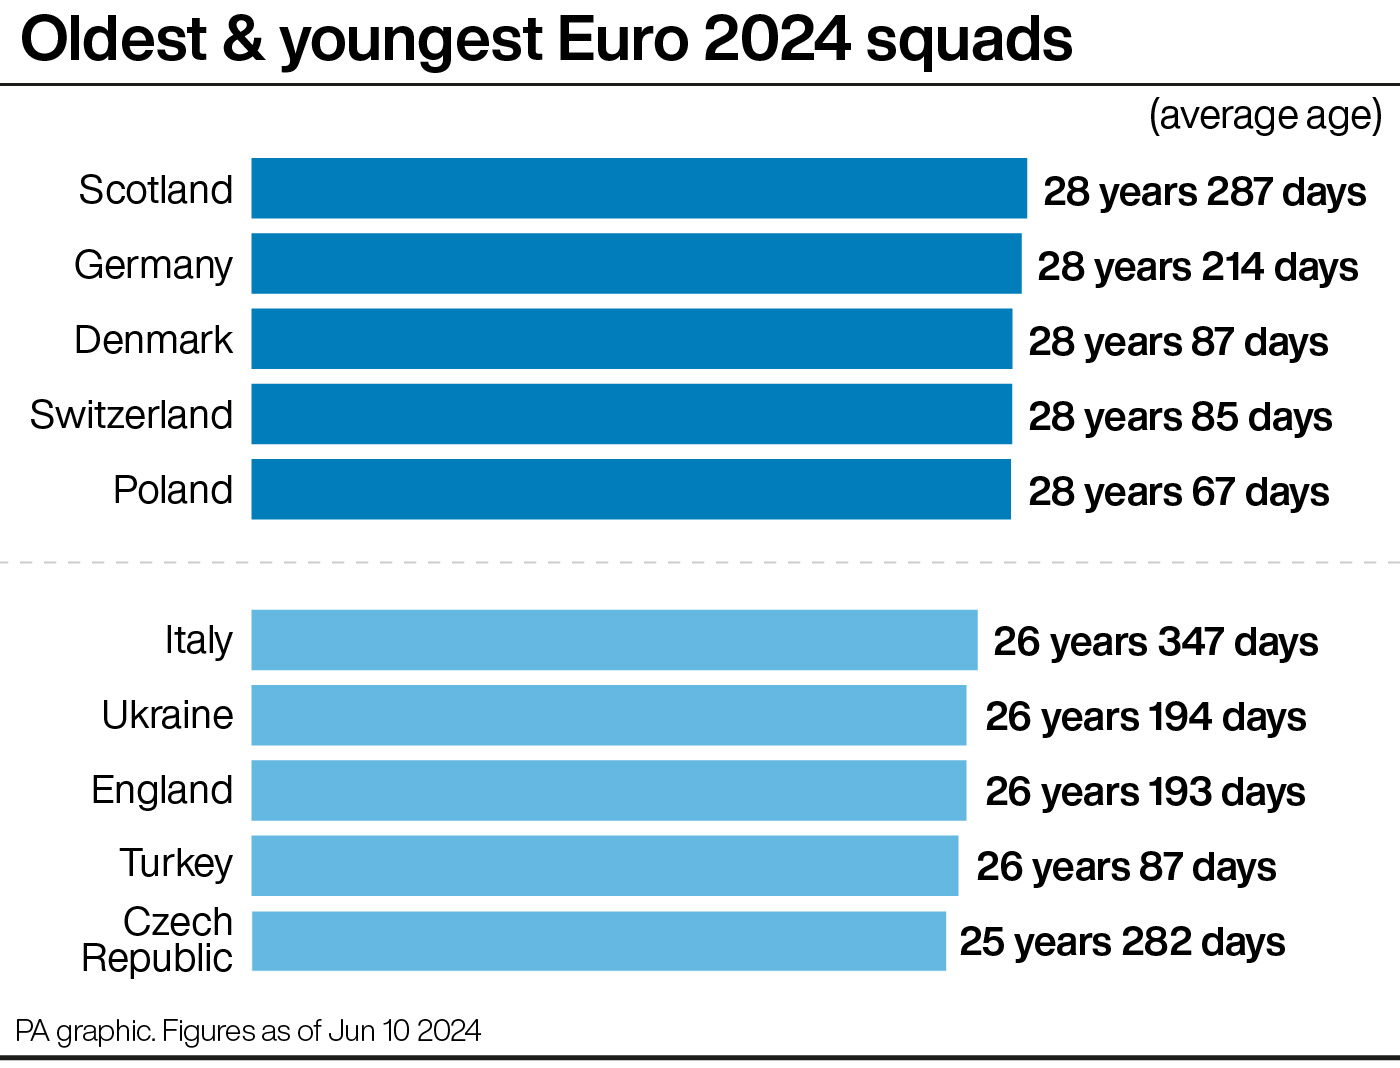 Bar chart showing oldest and youngest Euro 2024 squads by average age. Top five: Scotland 28 years 287 days, Germany 28 years 214 days, Denmark 28 years 87 days, Switzerland 28 years 85 days, Poland 28 years 67 days. Bottom five: Italy 26 years 347 days, Ukraine 26 years 194 days, England 26 years 193 days, Turkey 26 years 87 days, Czech Republic 25 years 282 days